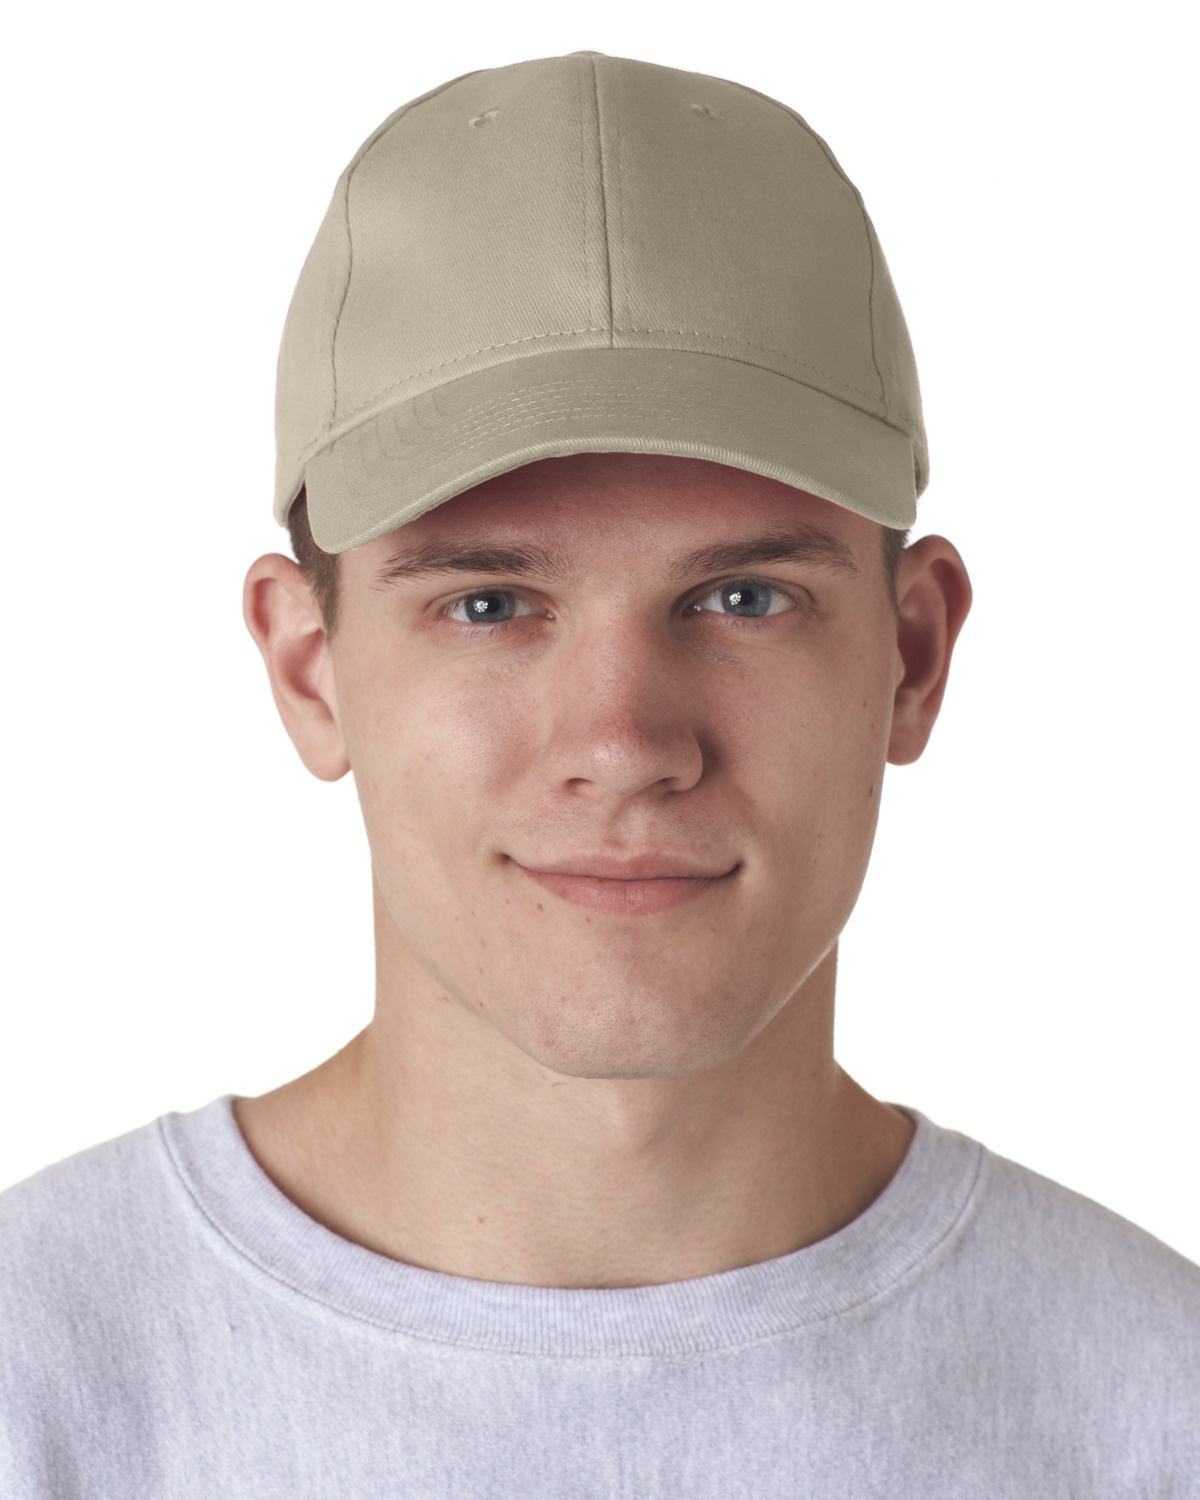 'UltraClub 8110 Adult Classic Cut Brushed Cotton Twill Structured Cap'